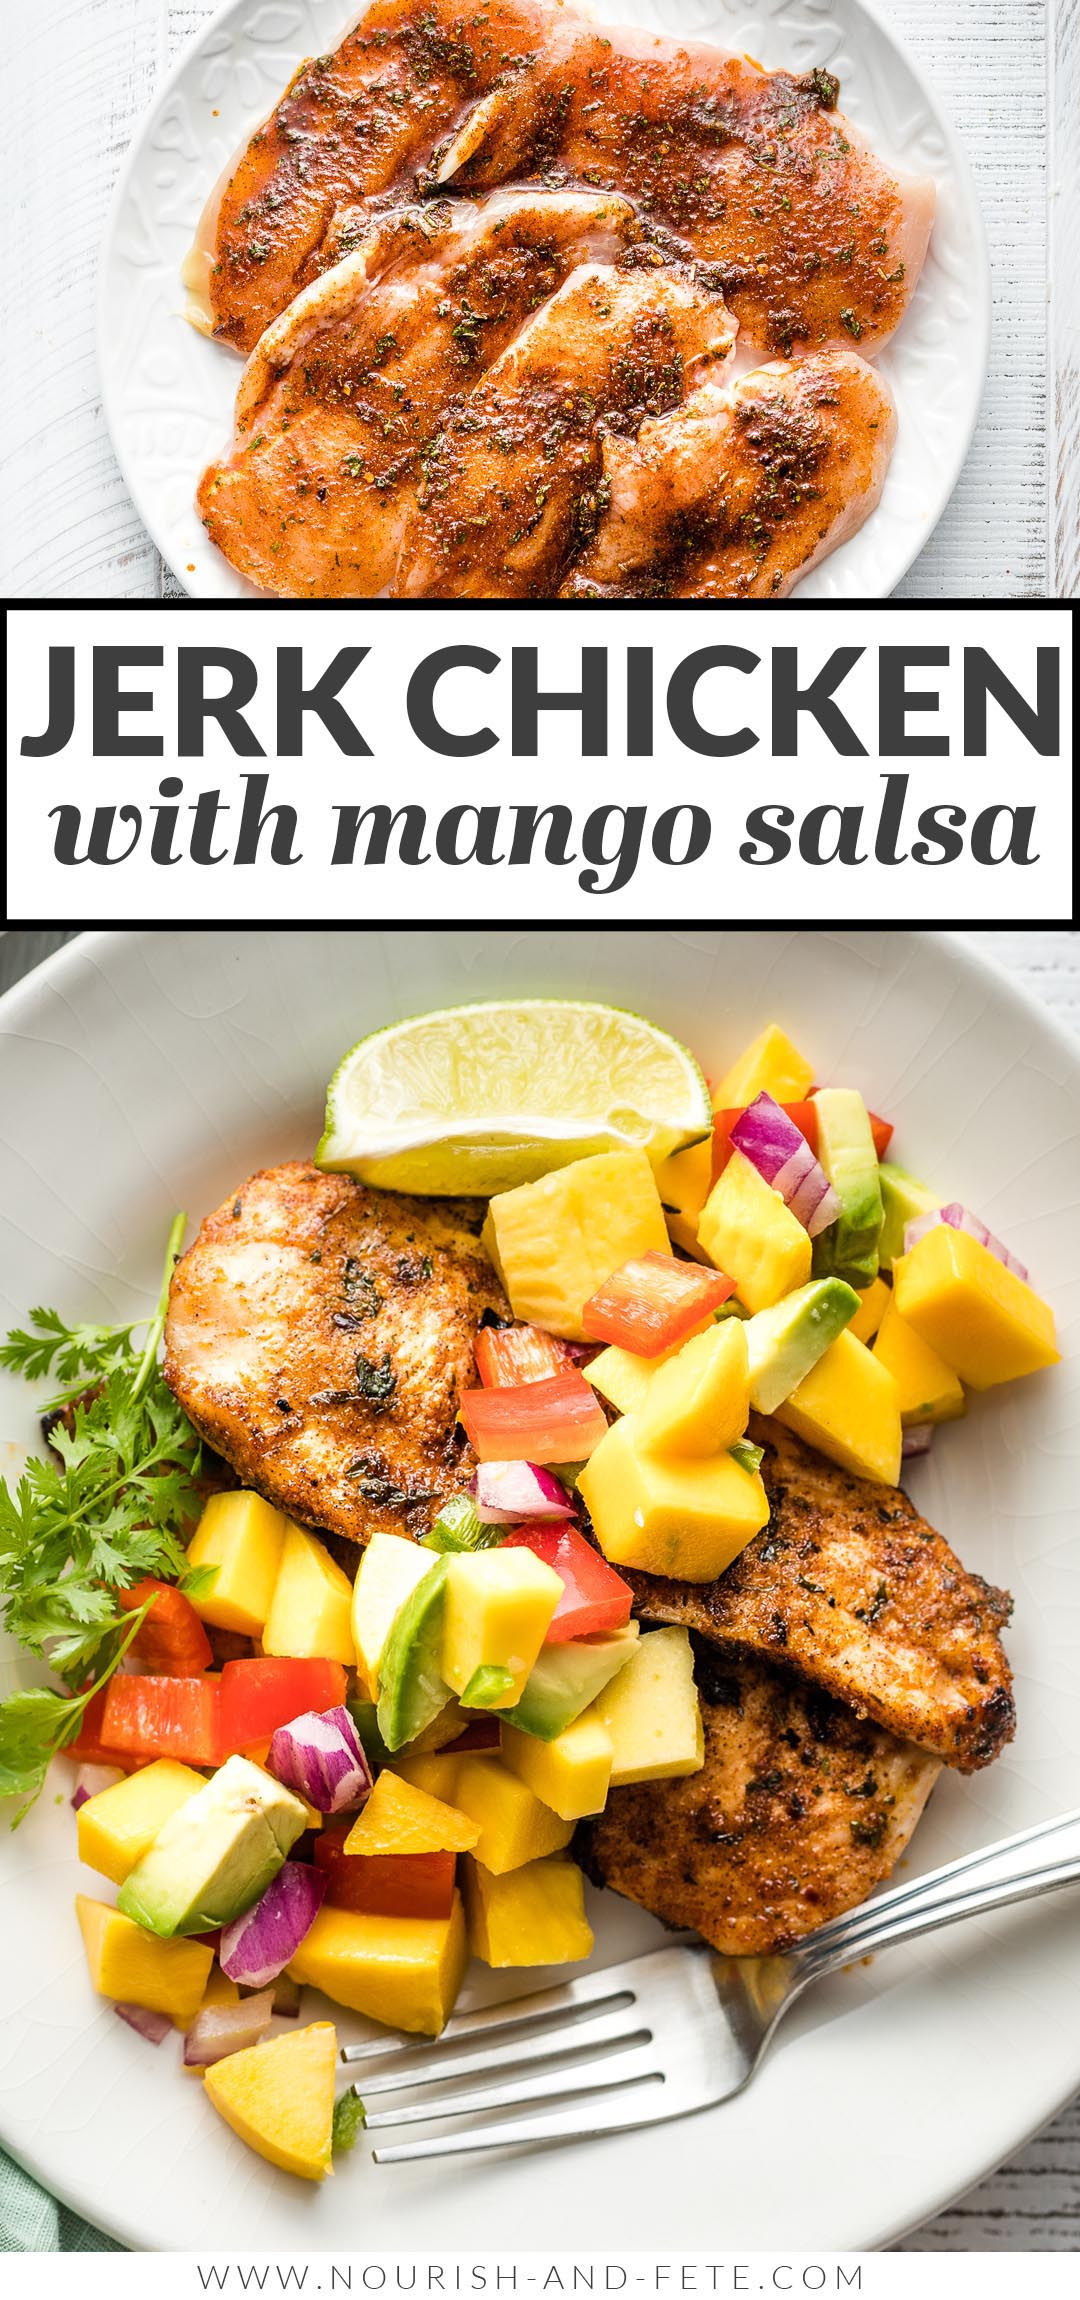 Delicious jerk chicken in a fraction of the usual time! Pair it with mango avocado salsa for a fresh, flavorful, healthy meal!